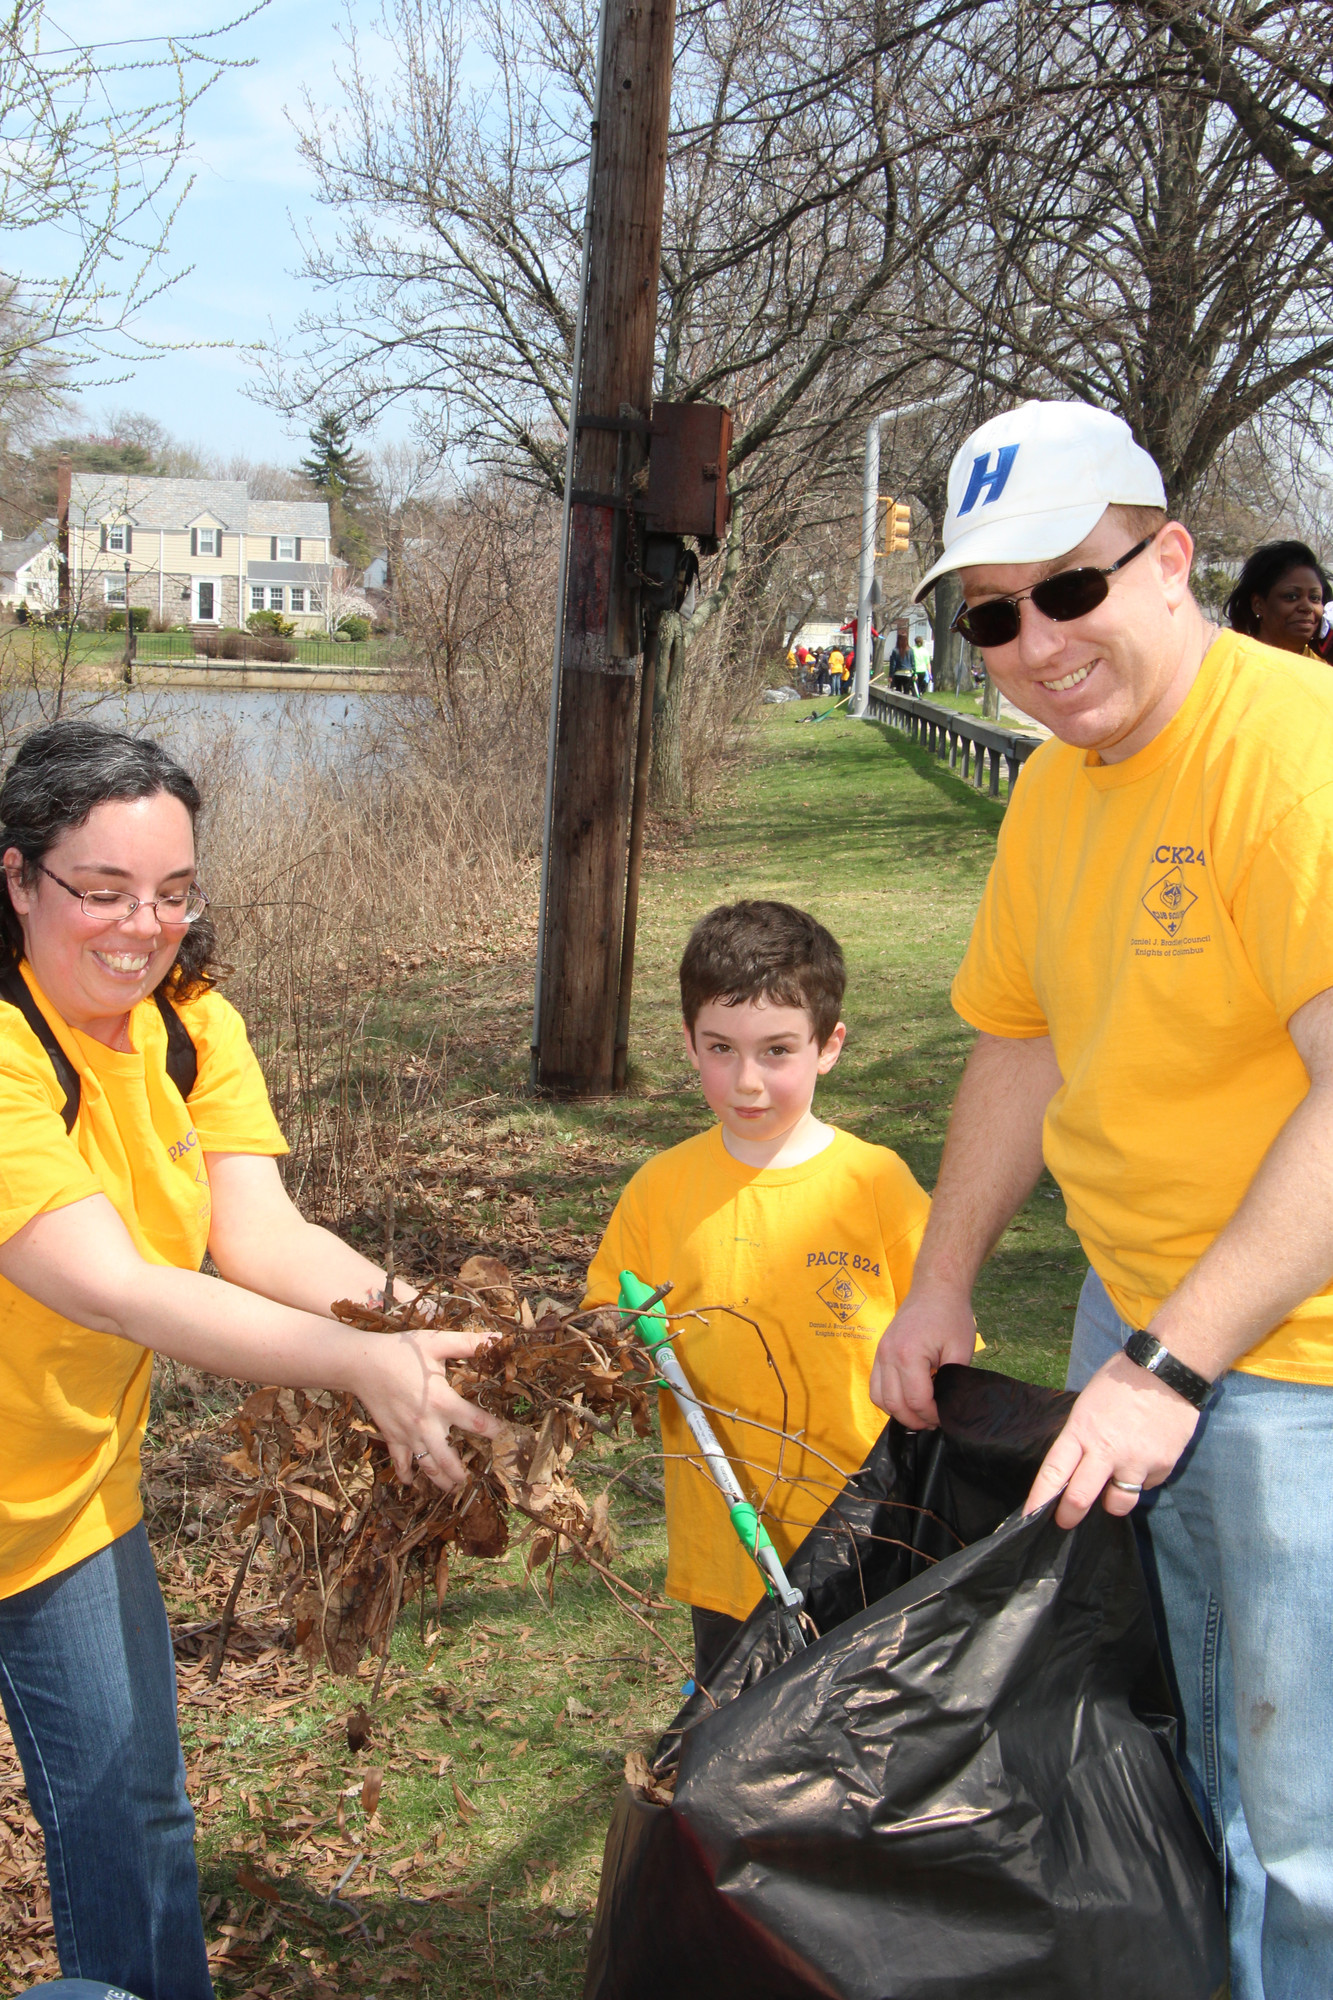 Theo Walsh, of Cub Scout Pack 824, with help from his parents Valerie and Matthew, picked up a lot of garbage and leaves at Lofts Pond Park last Saturday during an Earth Day cleanup.